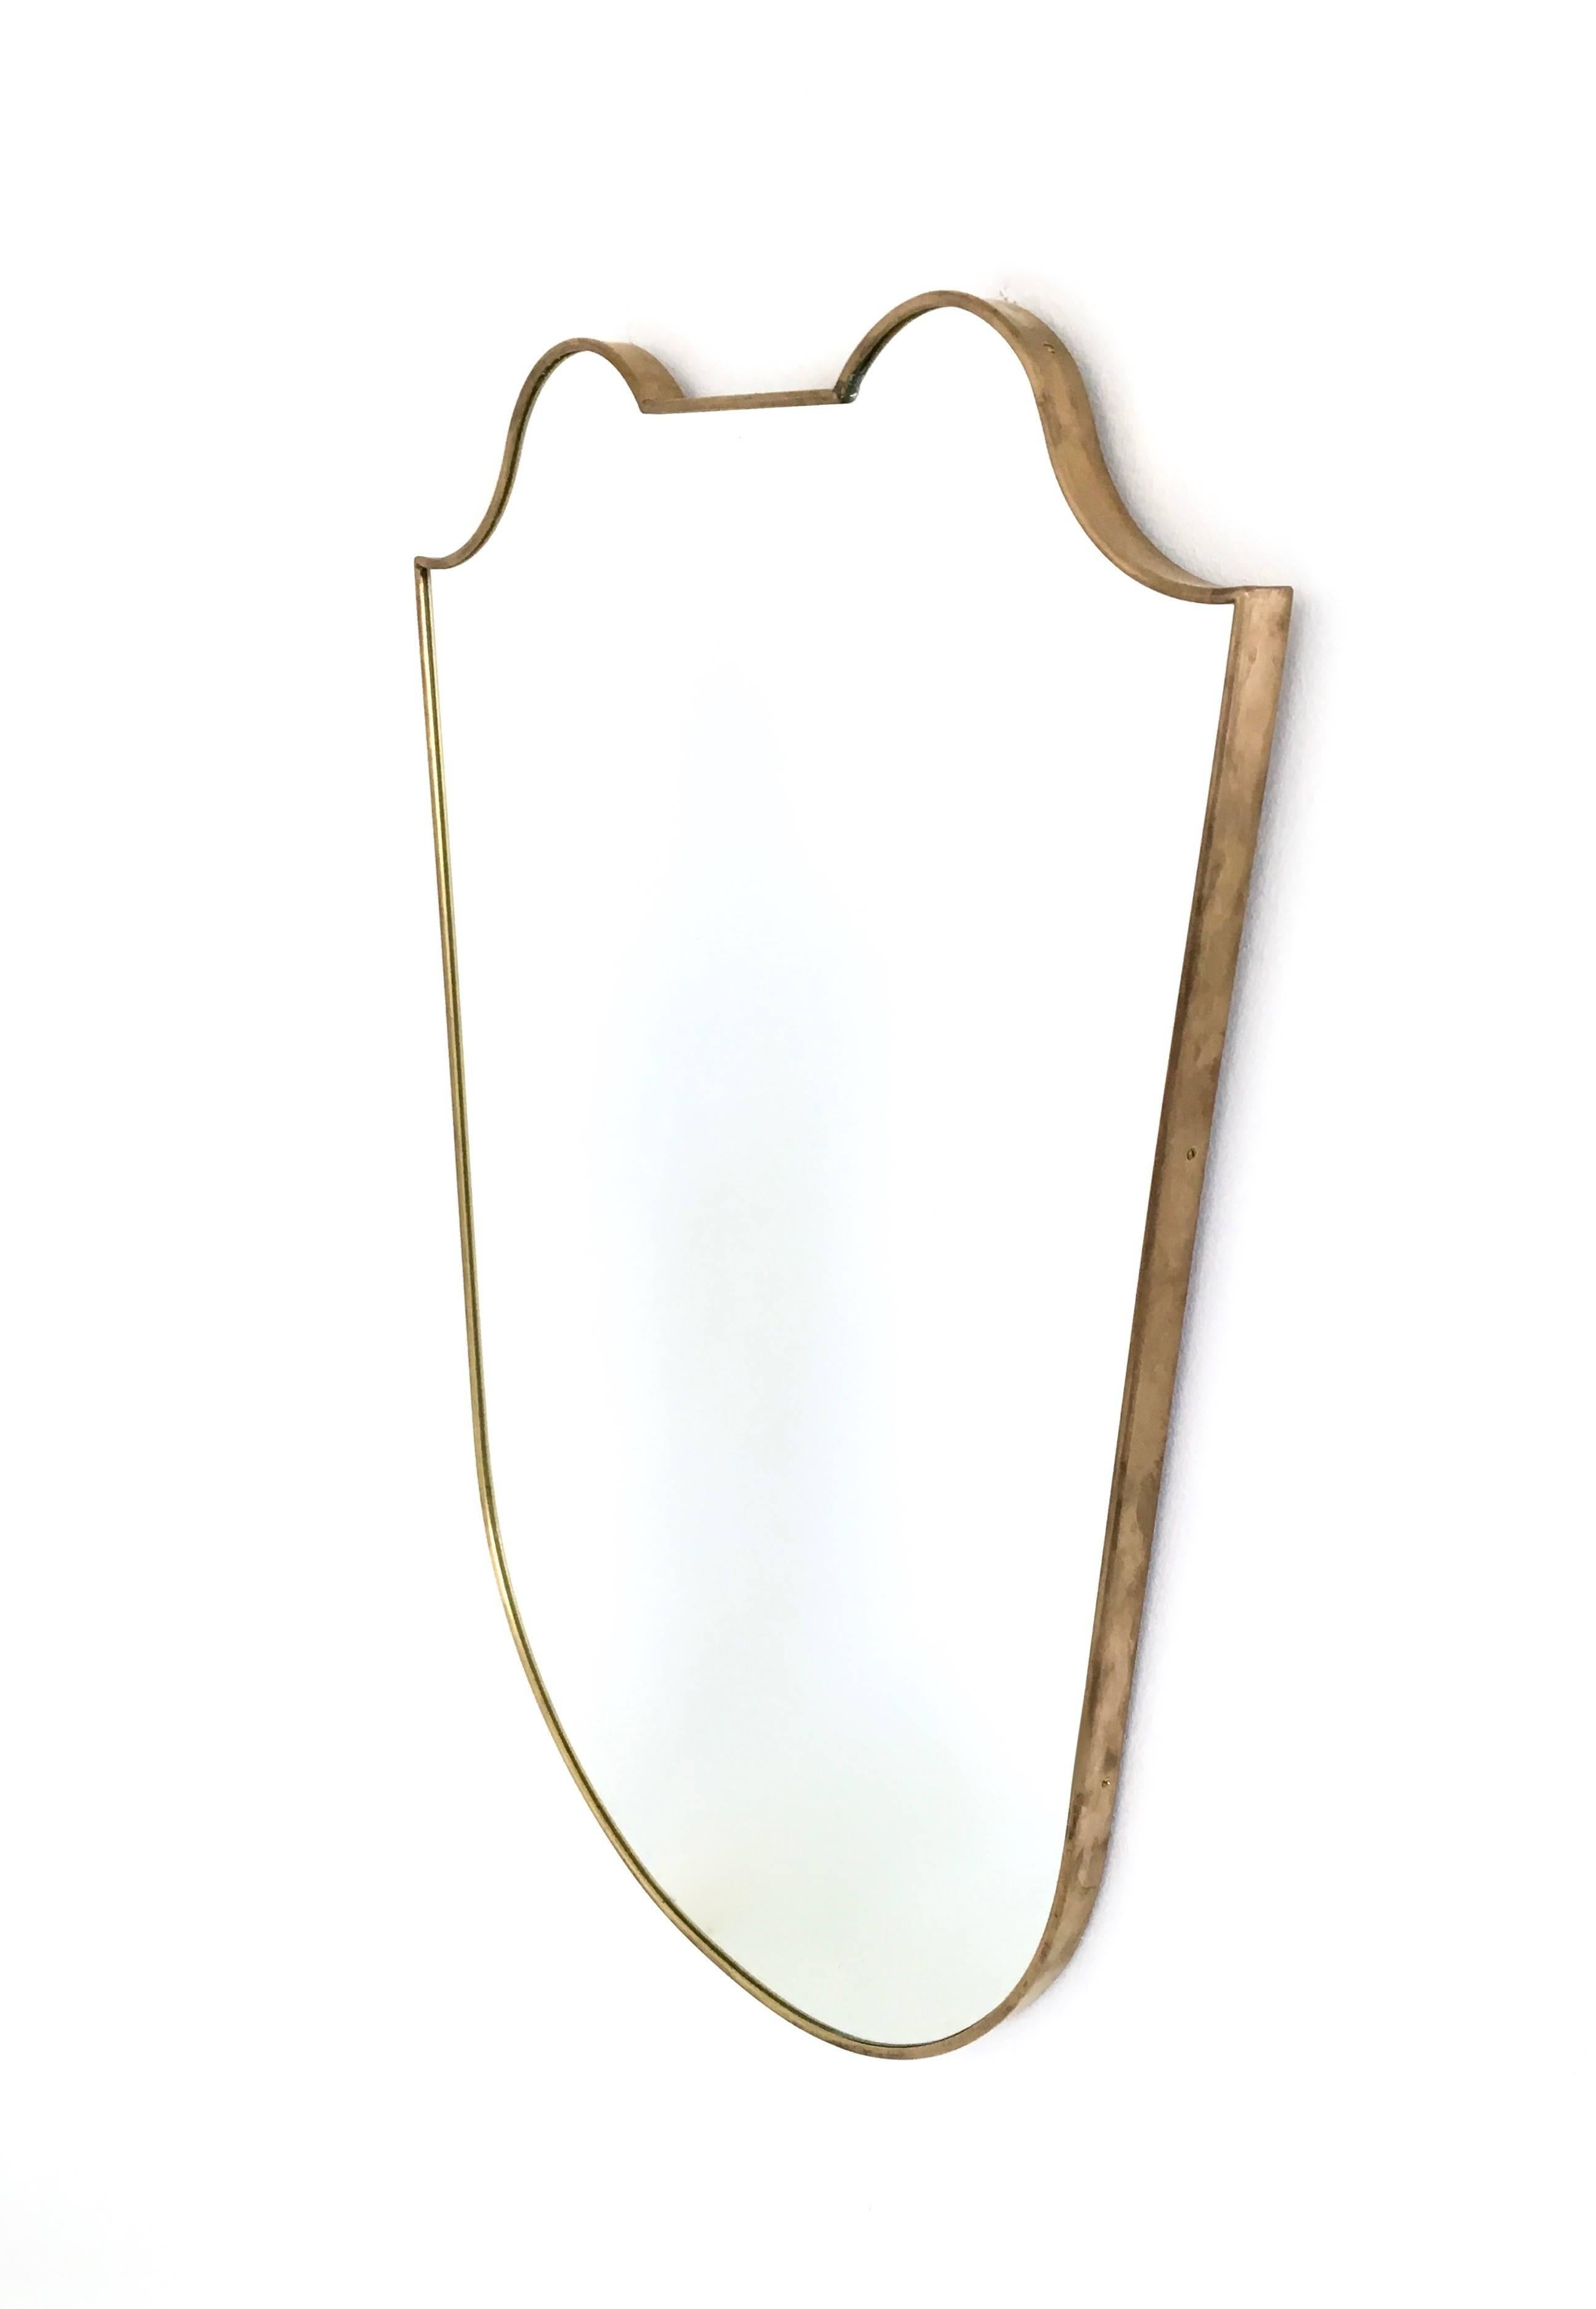 This wall mirror was produced in Italy in the 1950s and is made of brass
In perfect original condition.